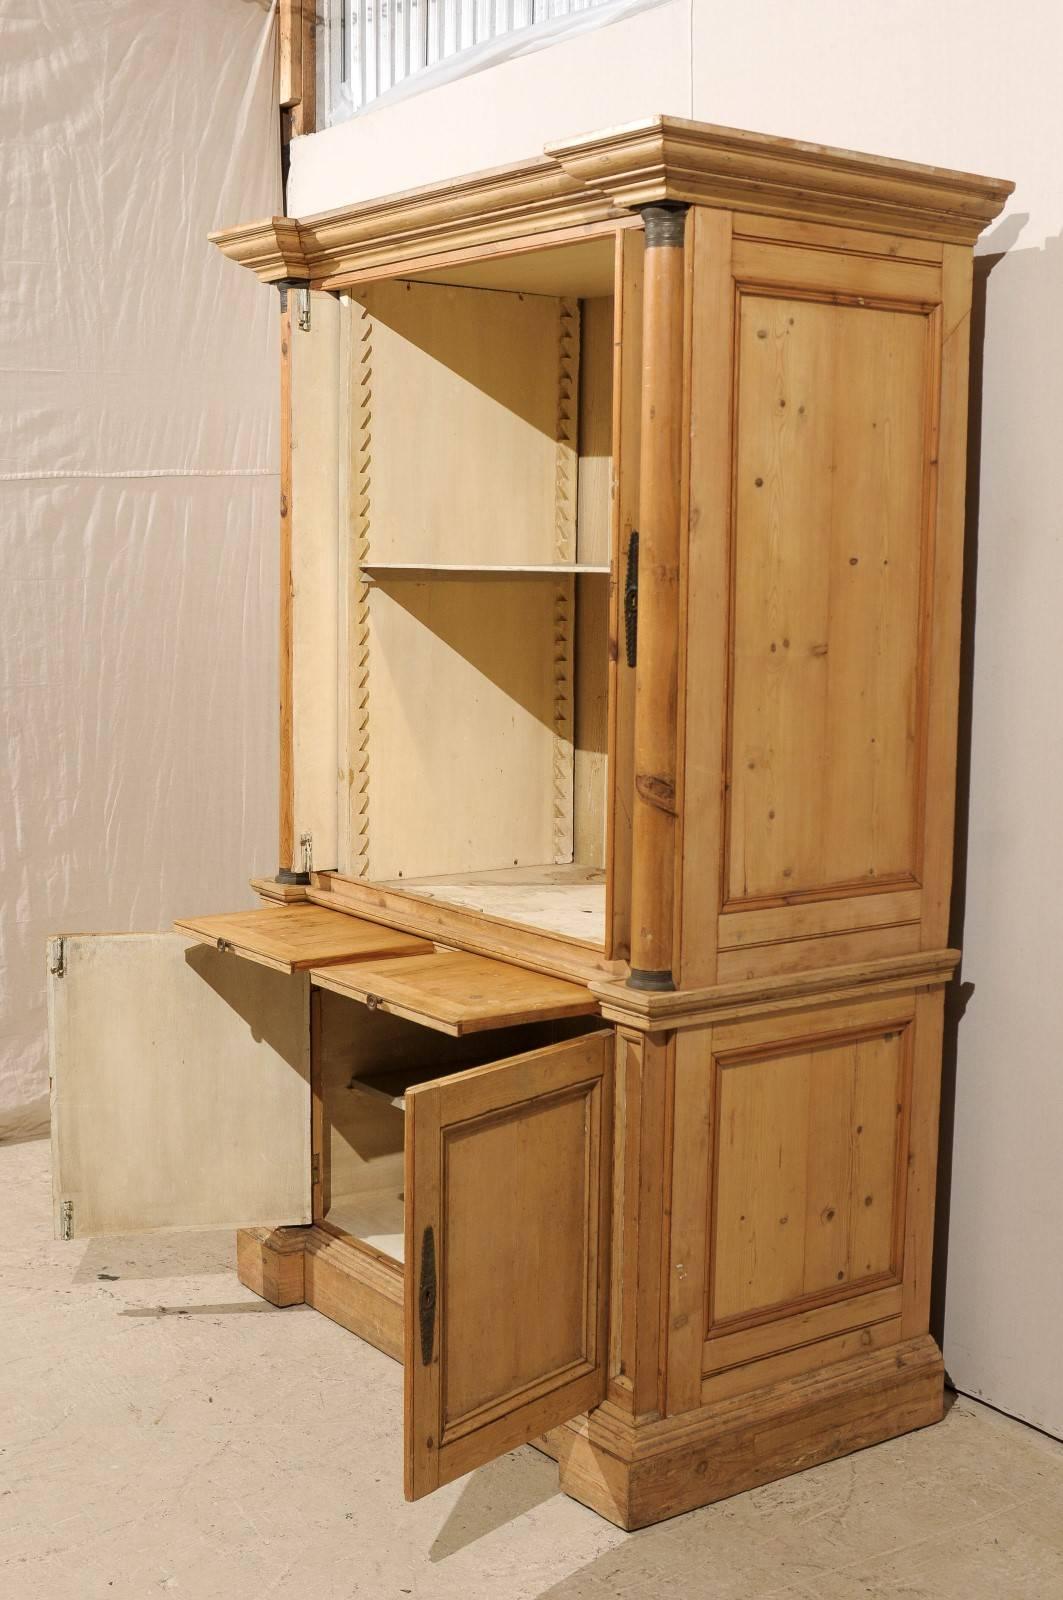 Carved 7’ ft tall English Four-Door Vintage Cabinet with Adjustable Shelves and Drawers For Sale